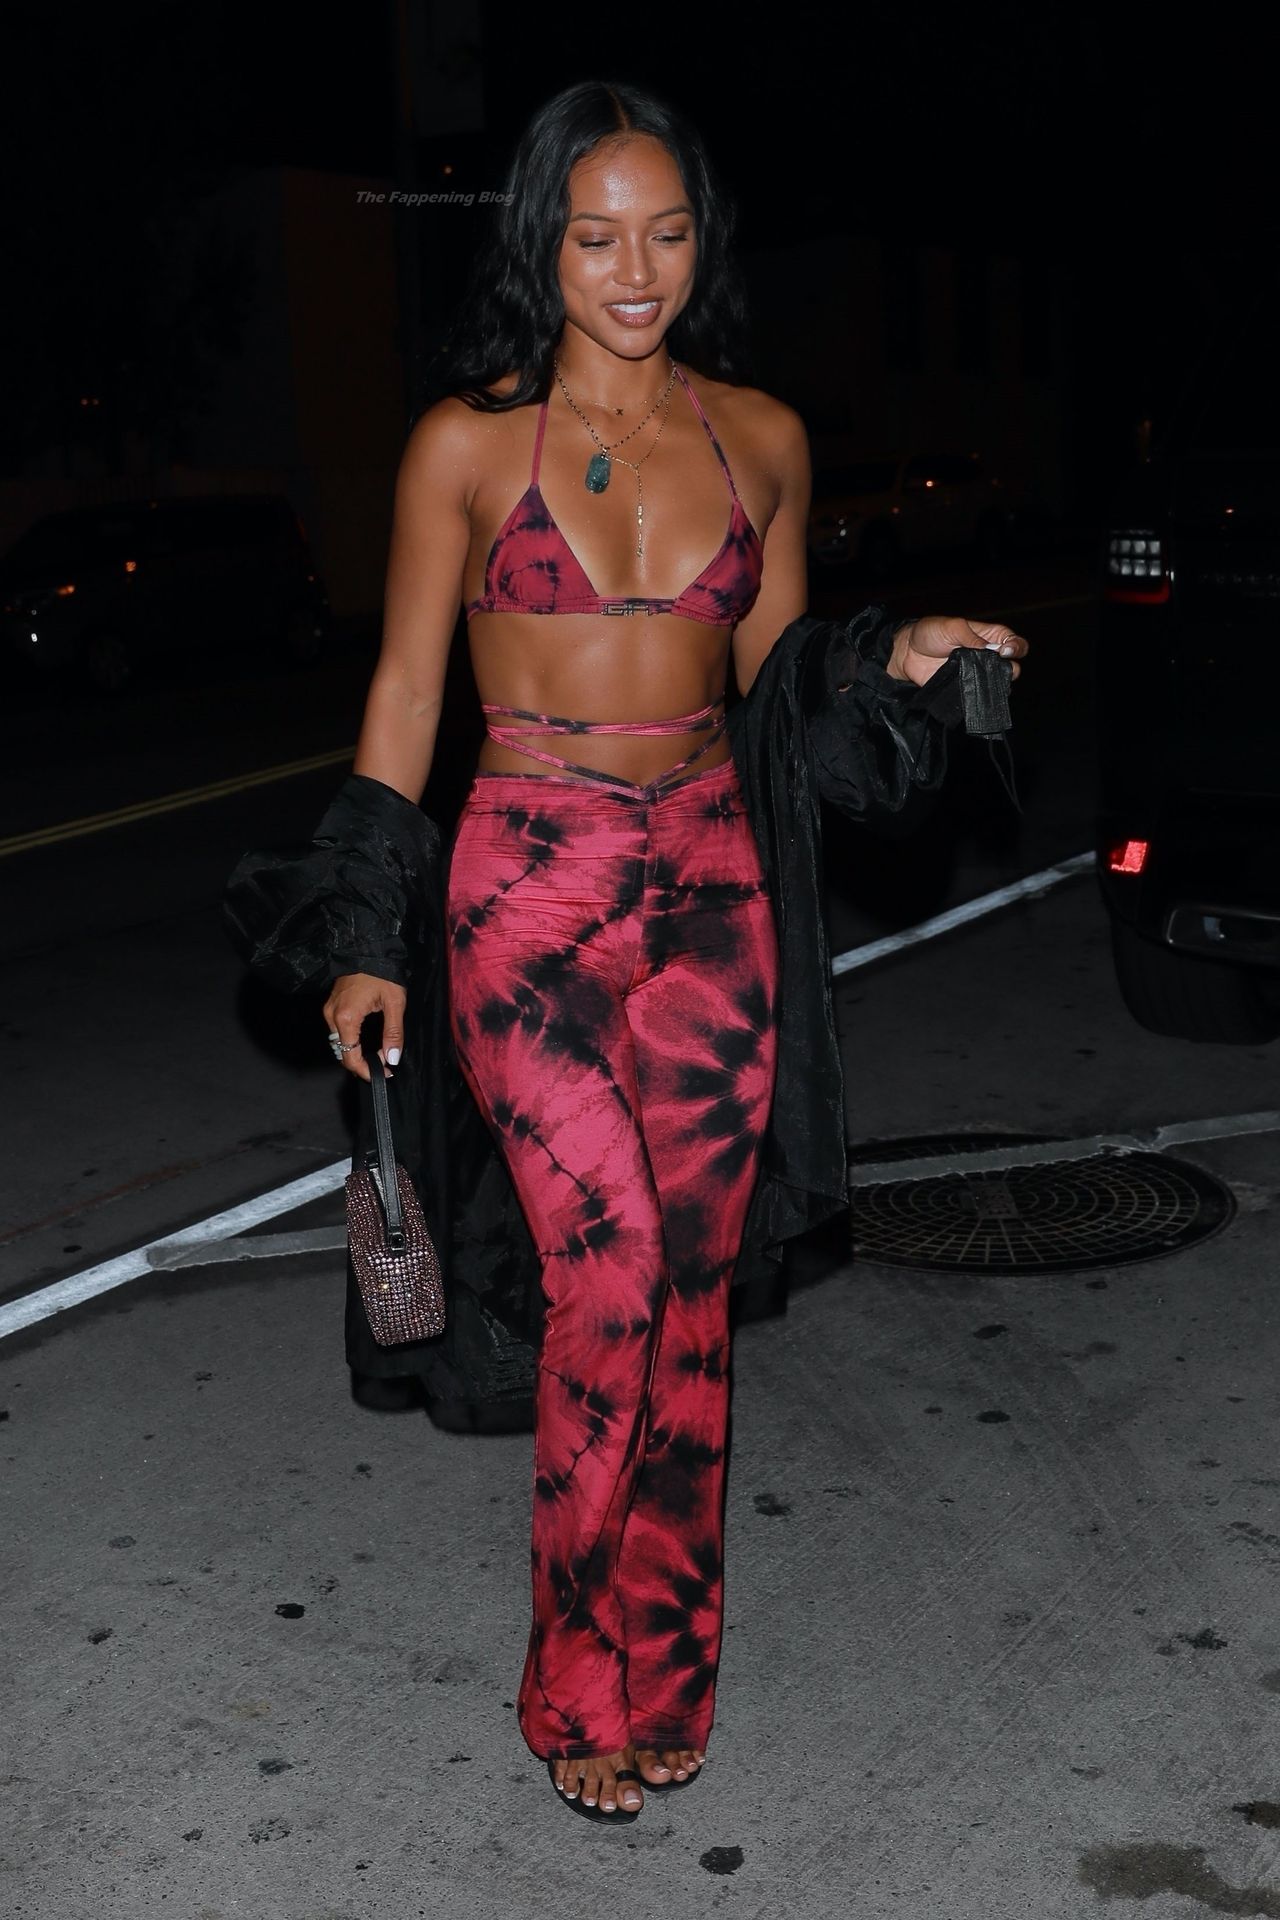 Karrueche Tran is T
urning Heads in Her Sexy Outfit as She Heads Out For Dinner (24 Photos)